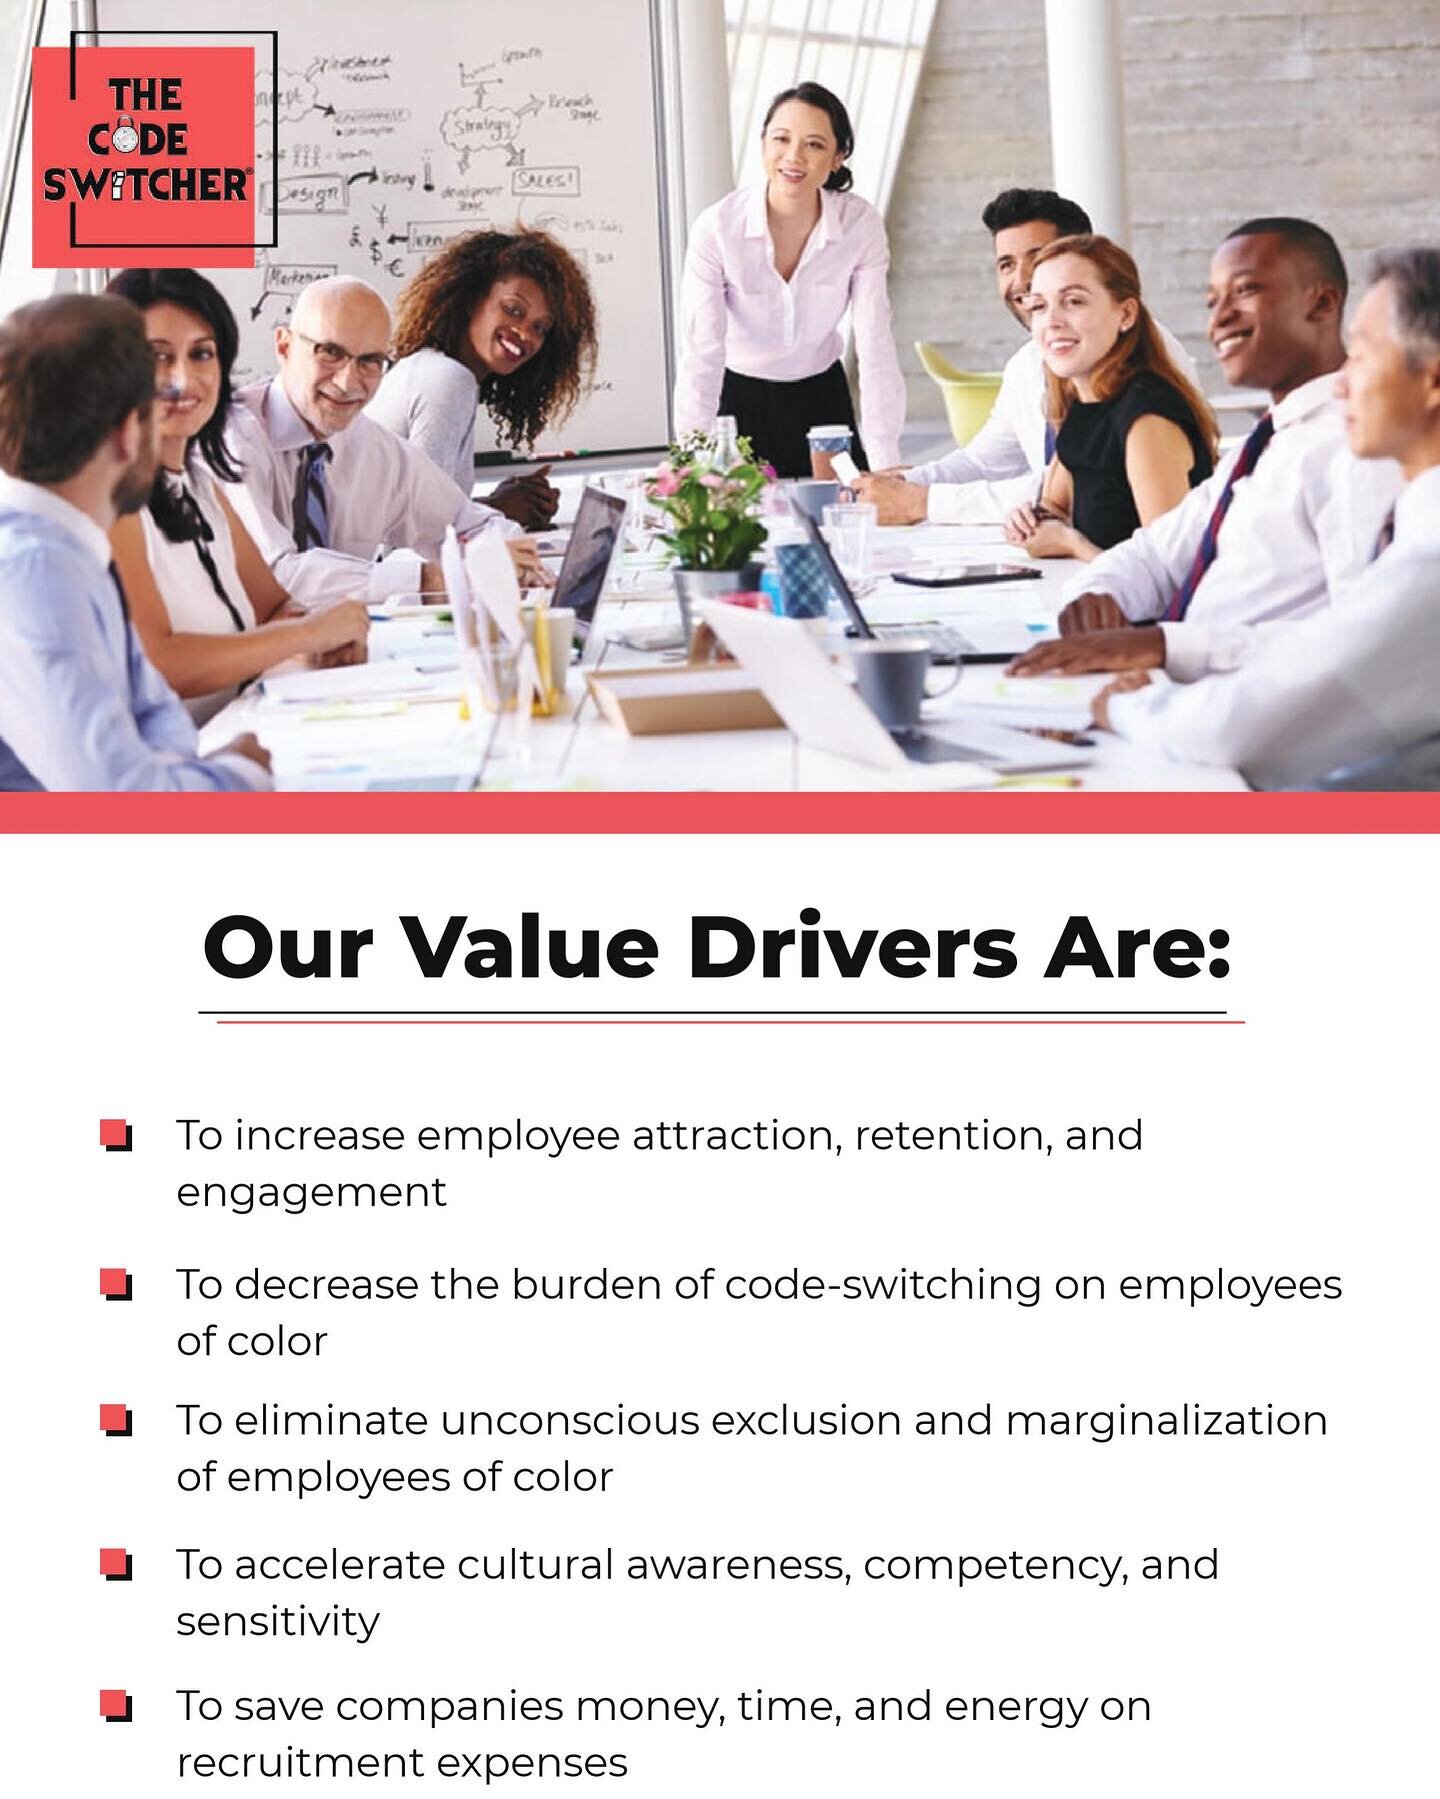 Our goal is to increase the retention rates of employees of color while helping corporations l save money and reduce their overall recruitment expenses. 

#georgepaasewe 
#thecodeswitcher 
#diversitytraining 
#diversityandinclusion 
#equity
#publicsp